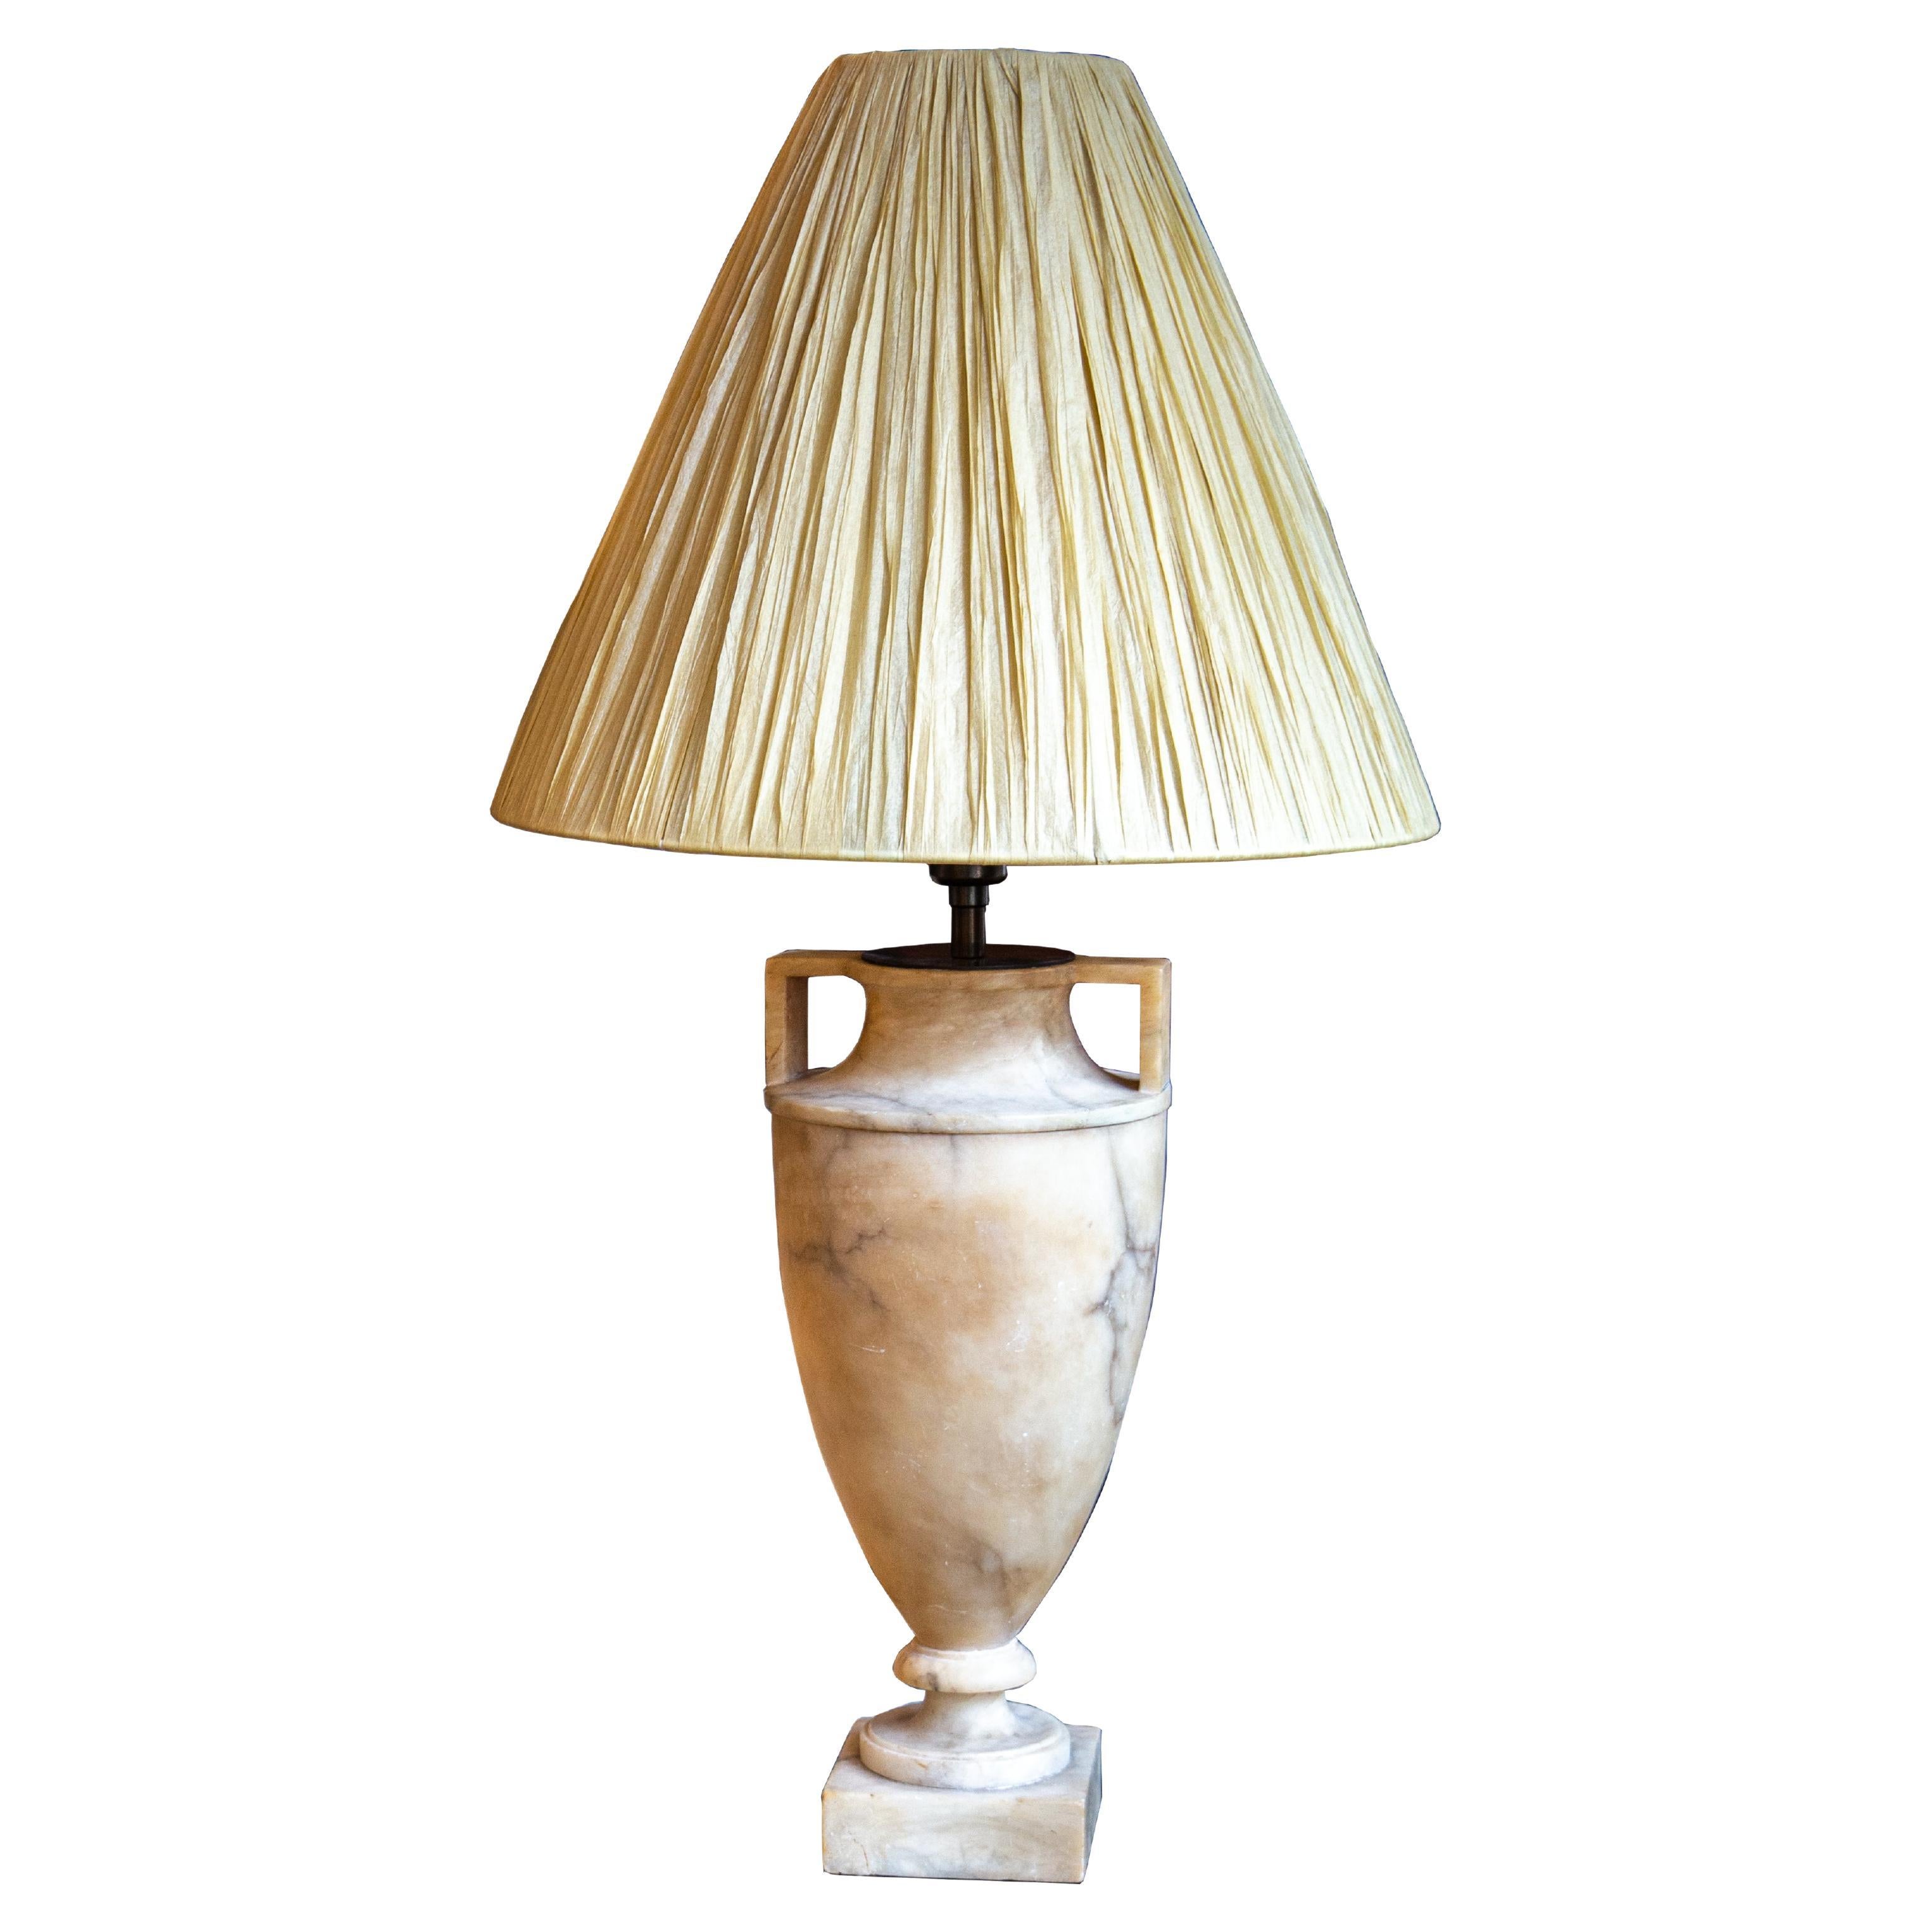 Late 19th Century Alabaster Amphora Urn Table Lamp with Bespoke Raffia Shade For Sale